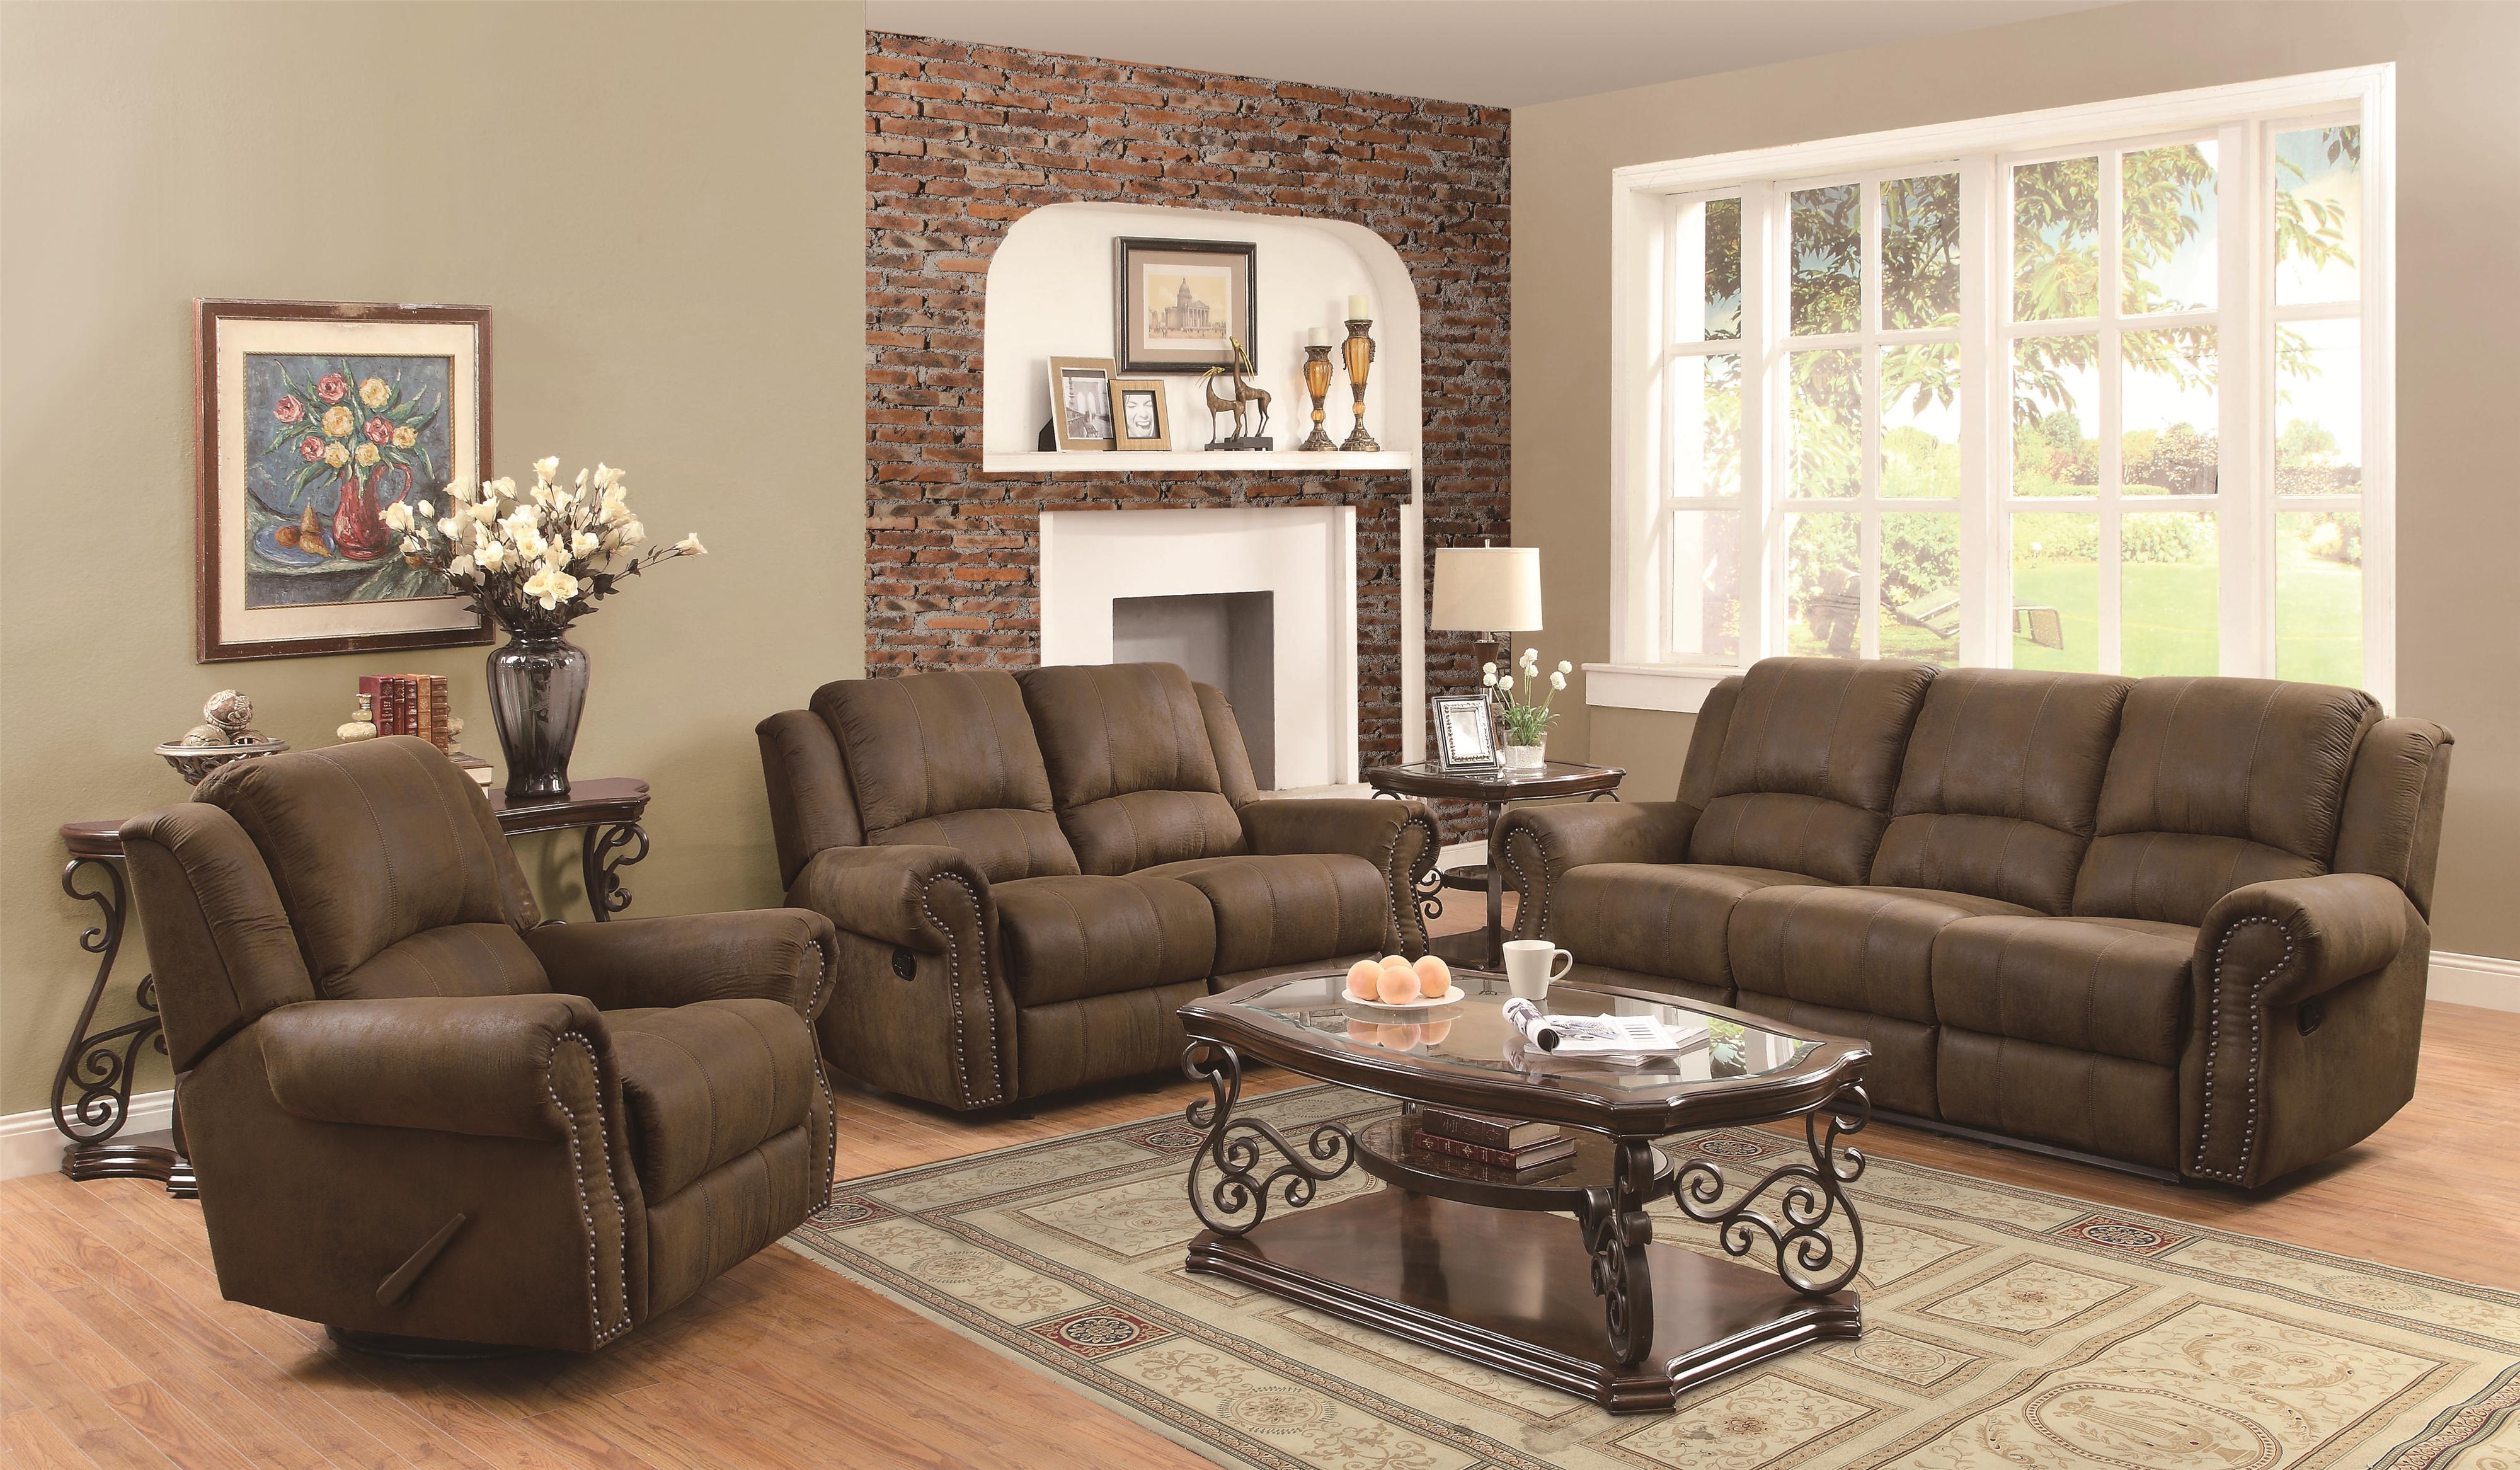 Bradley s Furniture Etc Rustic Reclining Sofas and Recliners